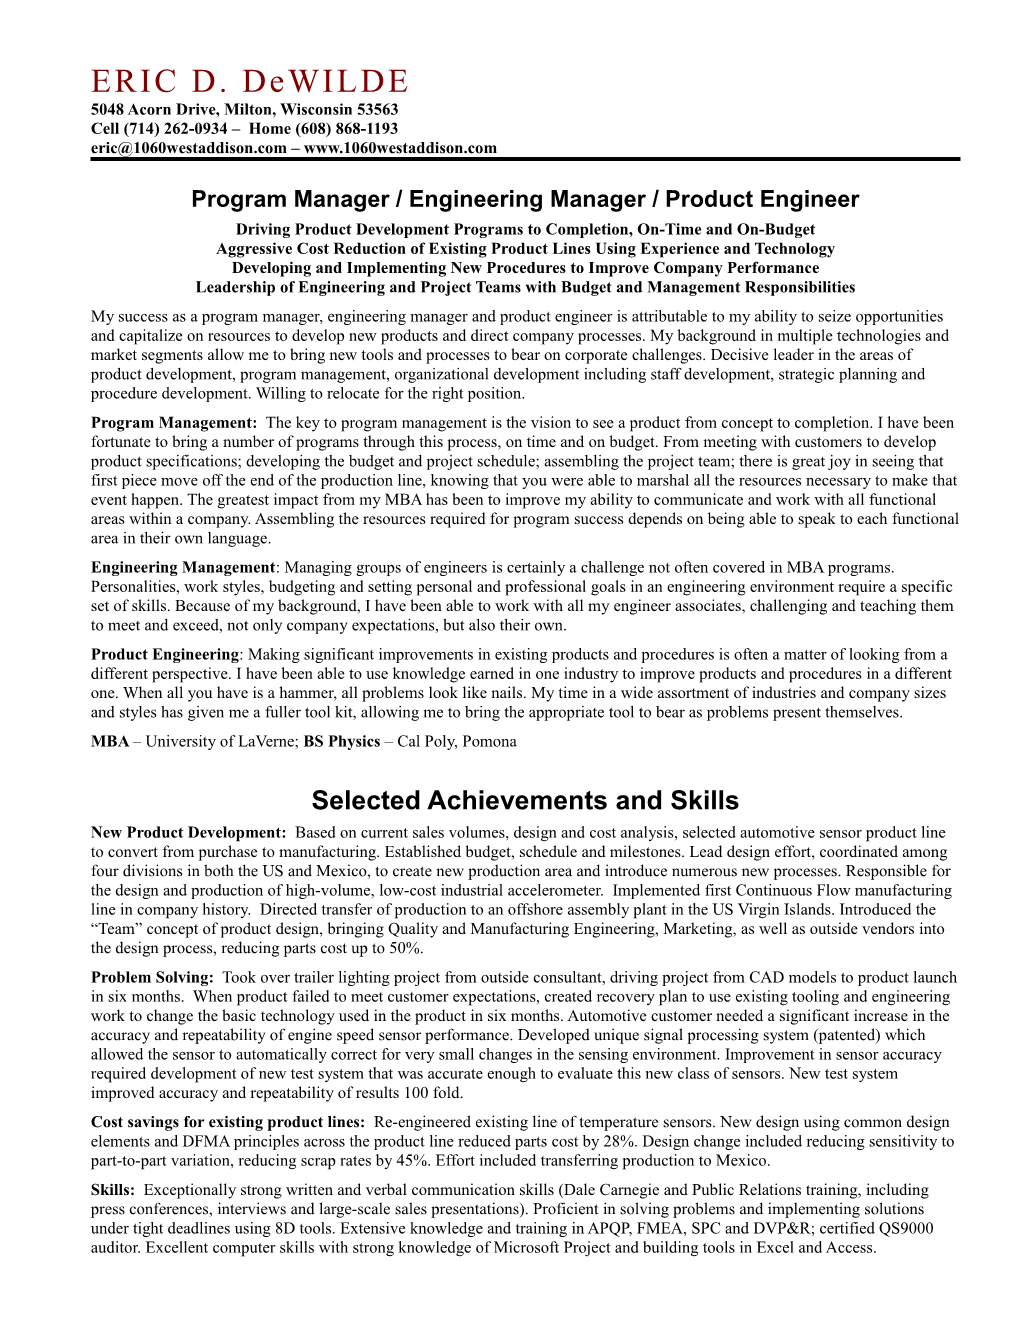 Program Manager / Engineering Manager / Product Engineer